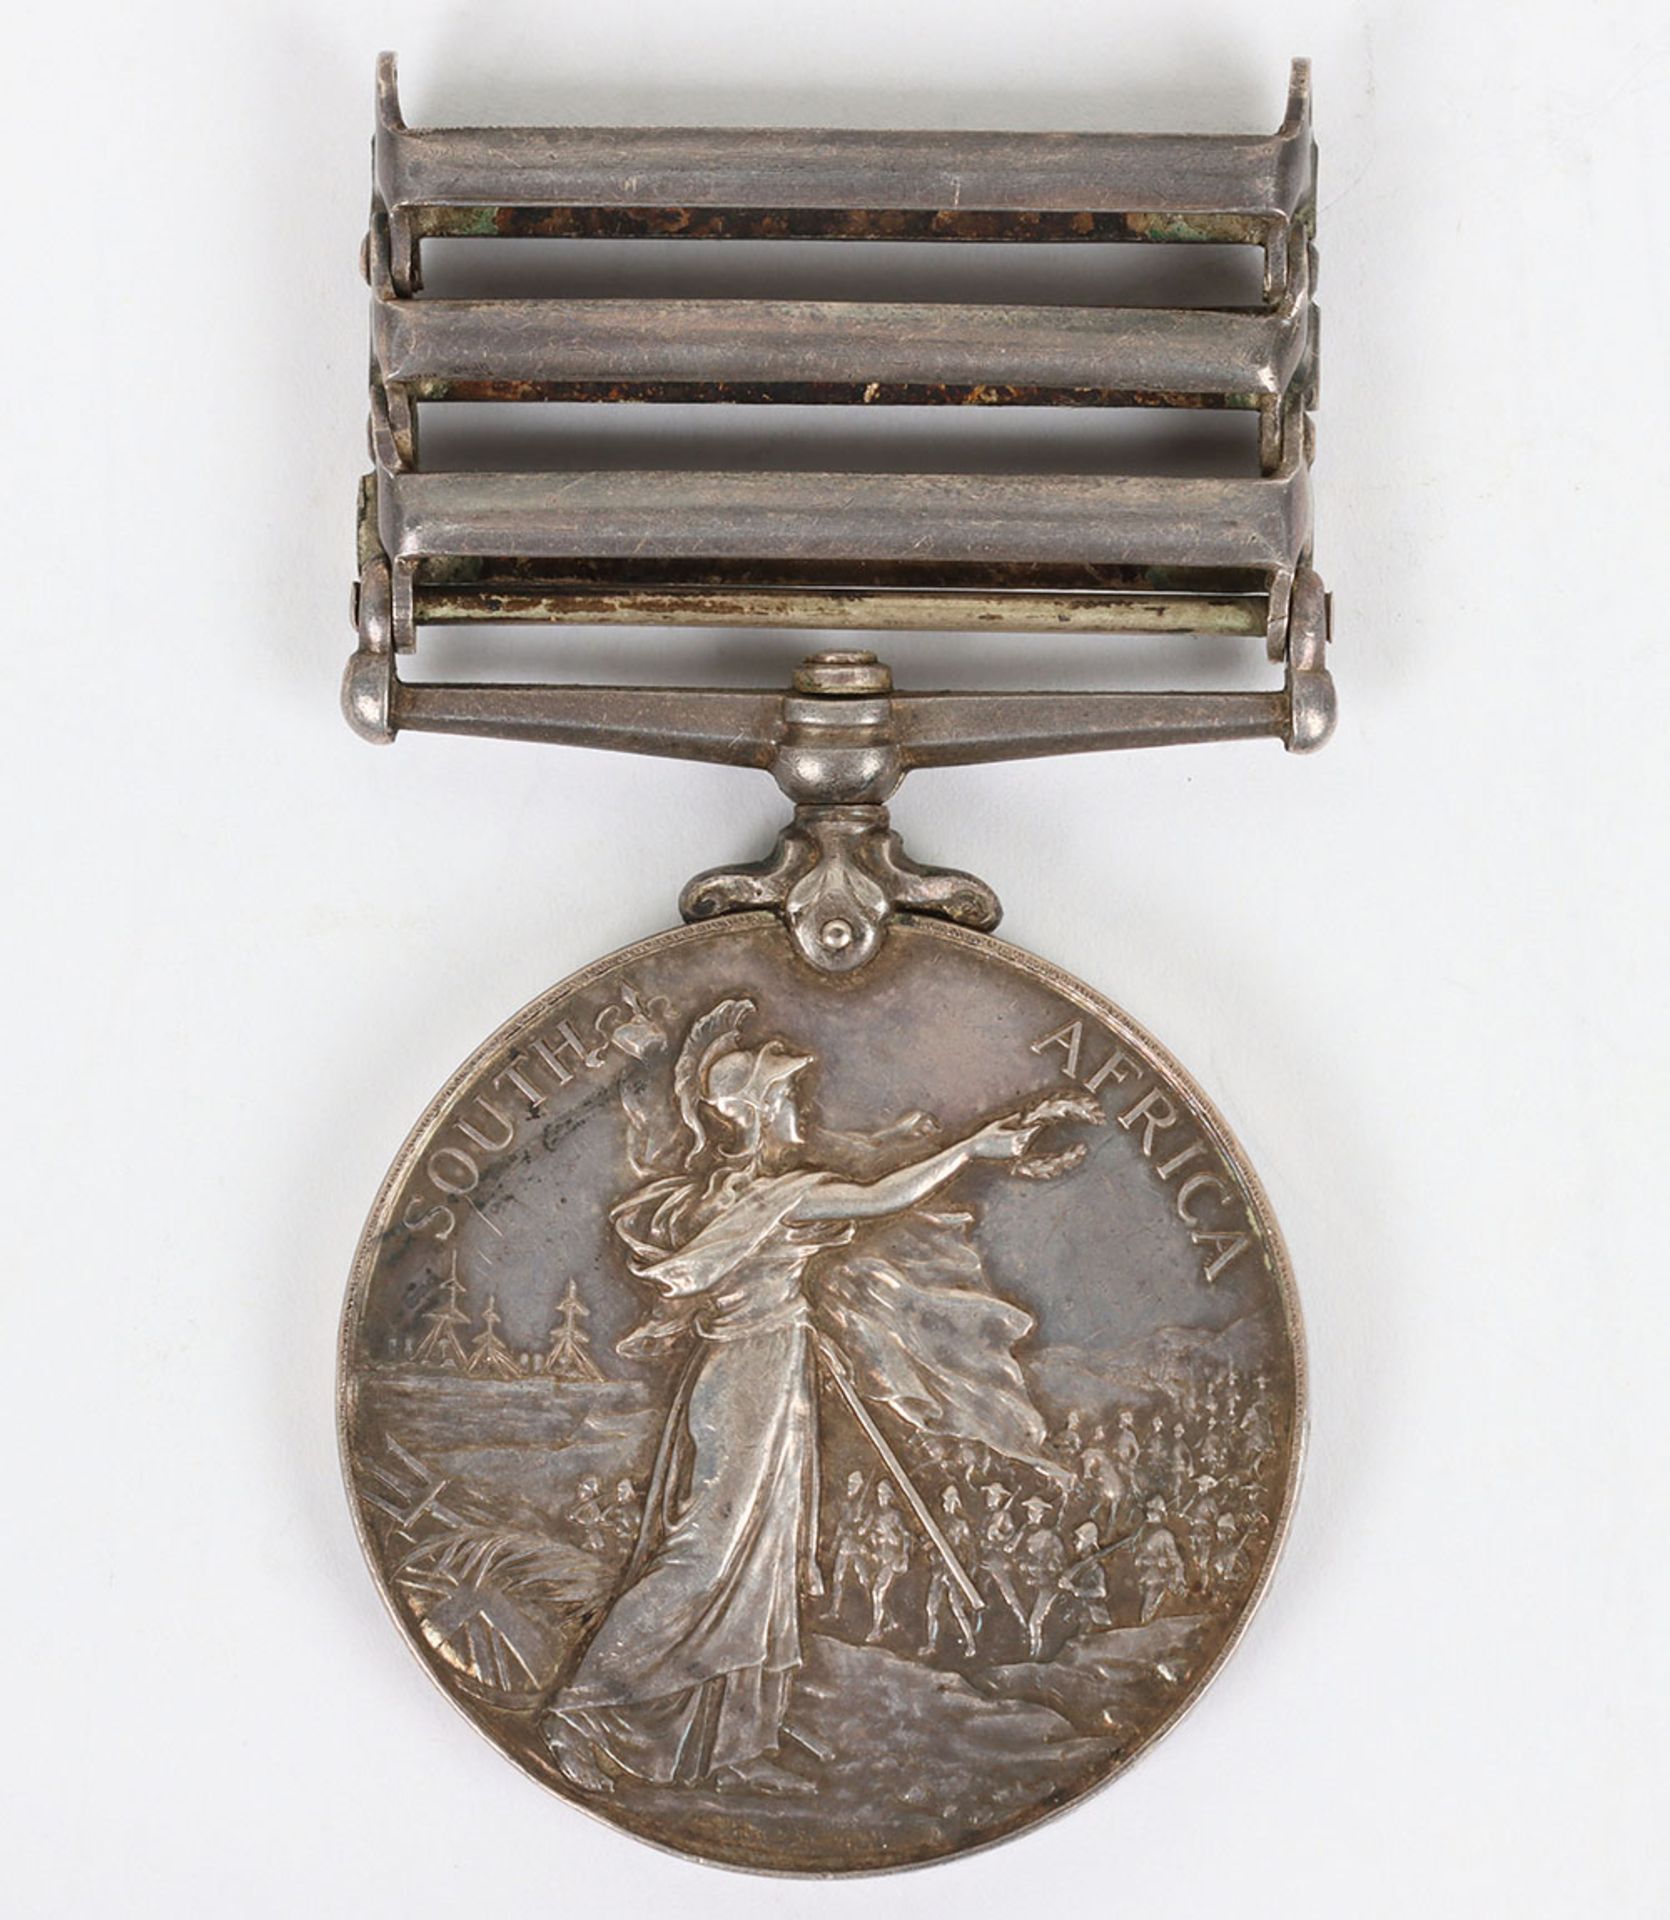 Queens South Africa Medal to a Recipient in the South Wales Borderers who was Killed in Action in 19 - Image 2 of 5